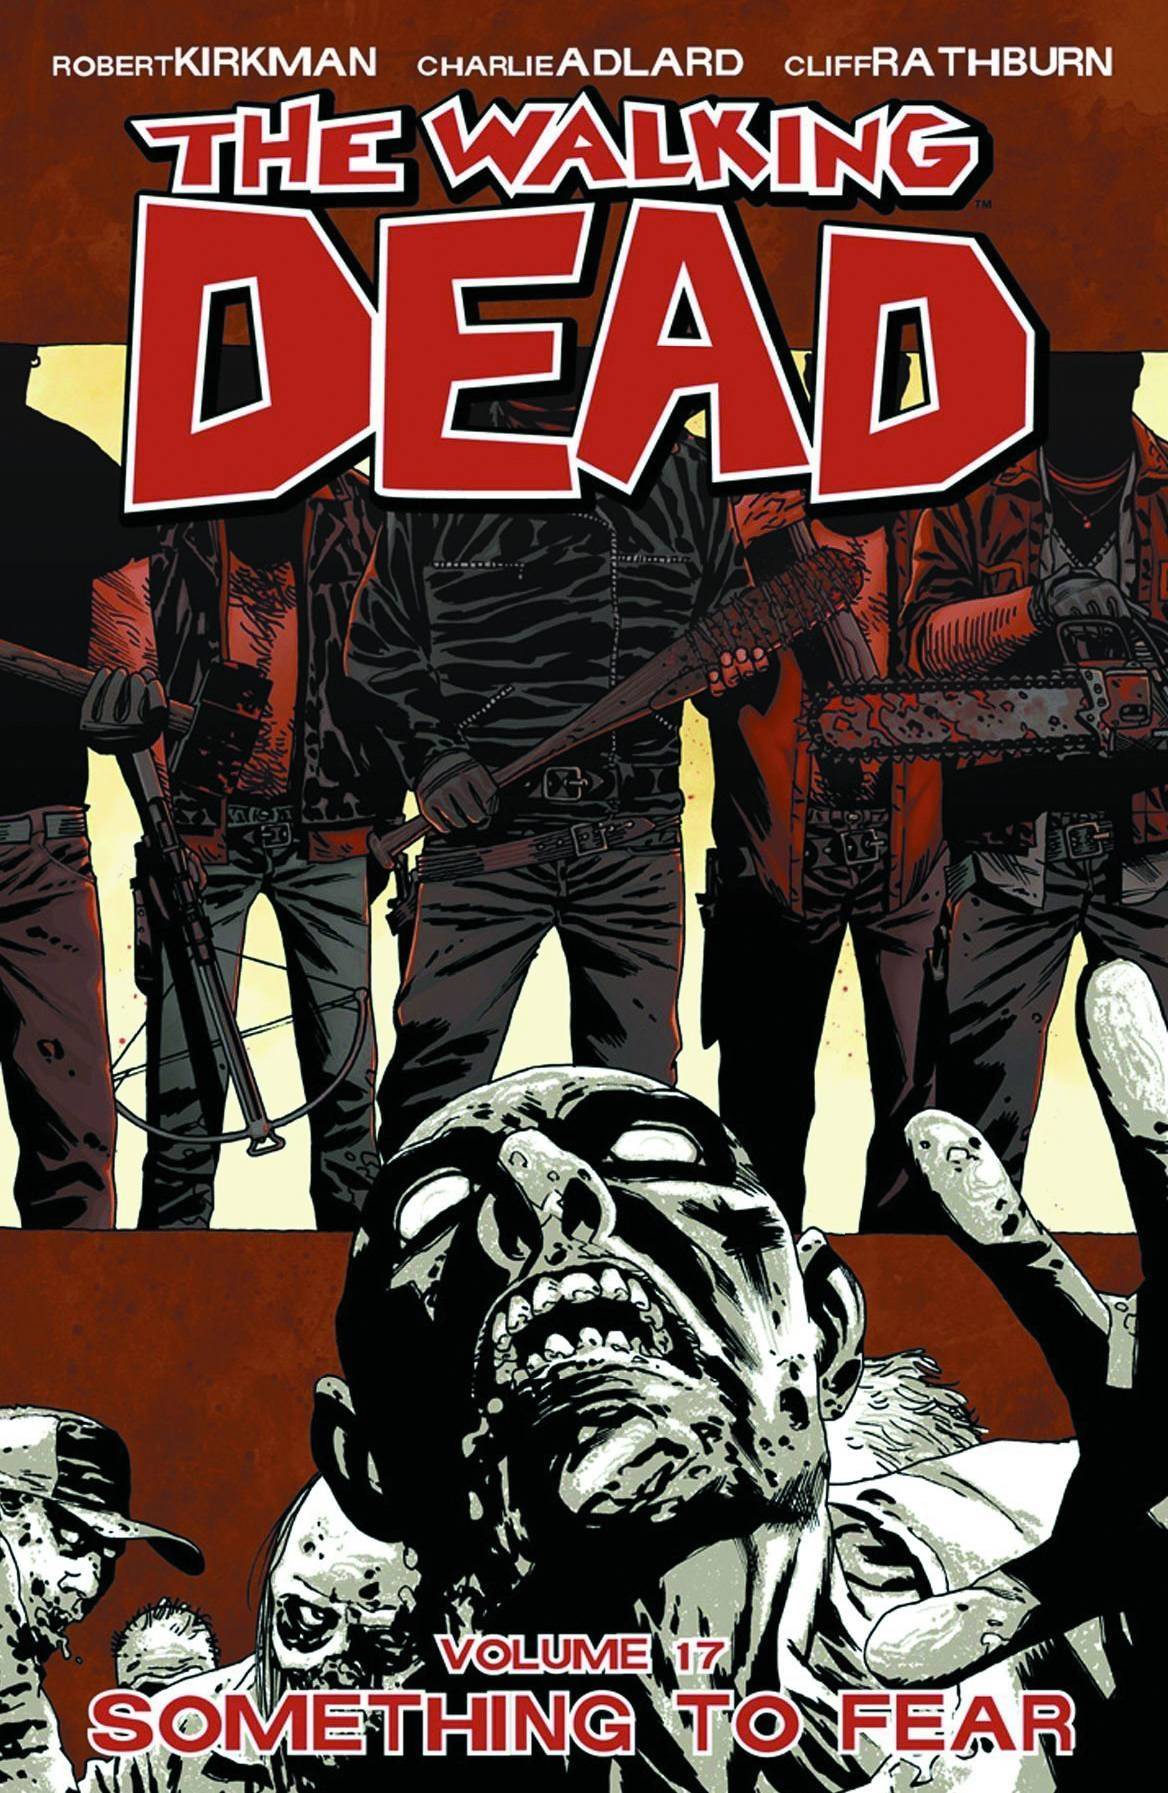 Walking Dead TP Vol 17 Something to Fear - State of Comics